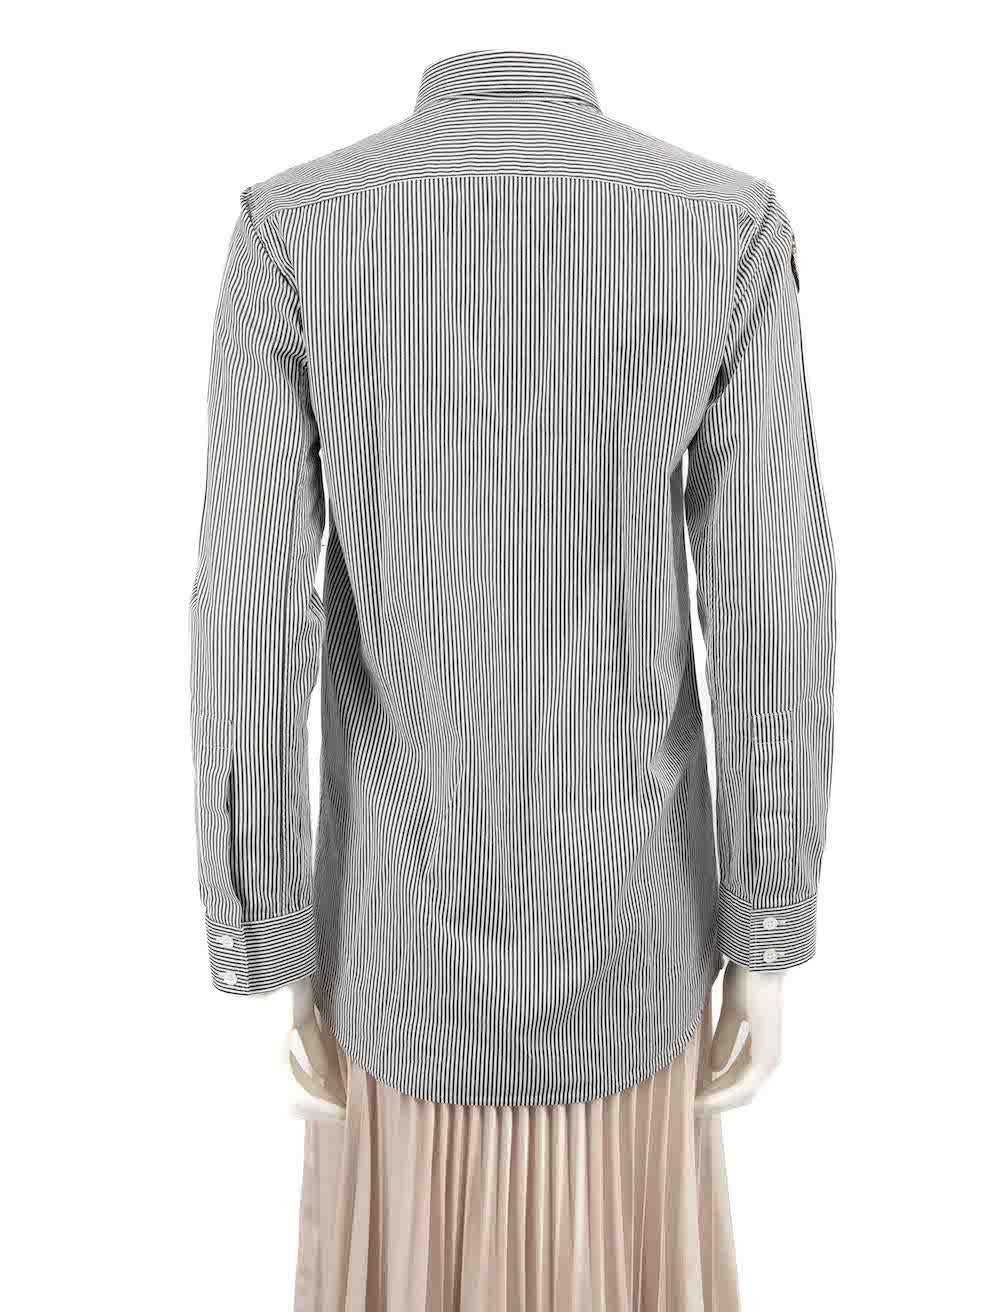 Balmain Grey Striped Eagle Detail Buttoned Shirt Size XS In Good Condition For Sale In London, GB